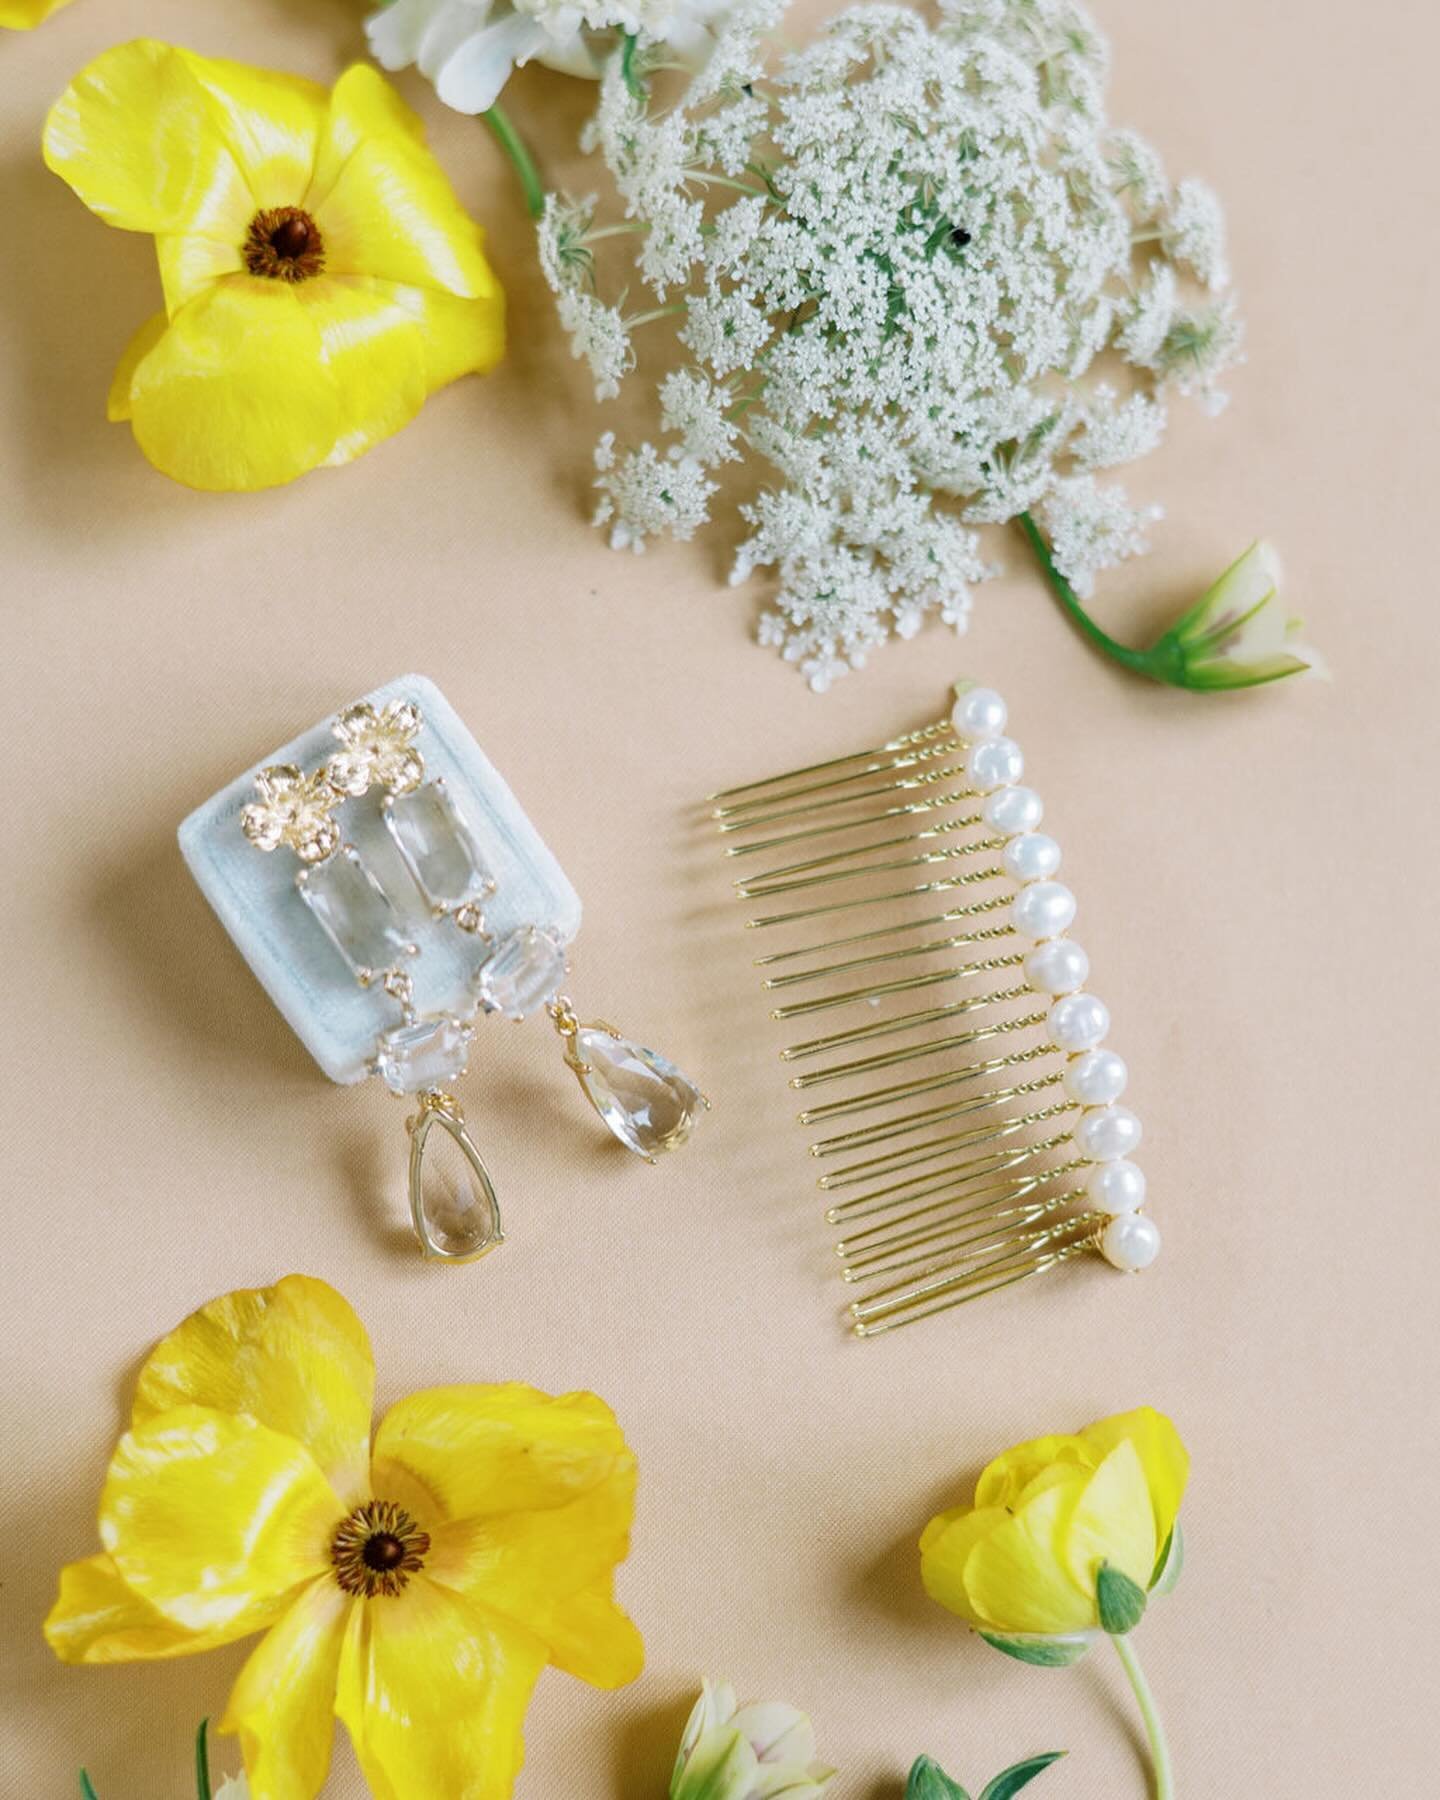 Have you heard of Sugarcane Co? Their bridal accessories will have you falling in love all over again! ✨

From delicate earrings to statement hairpieces, these pieces add a touch of refinement to your wedding day look. 

Book an accessory appointment